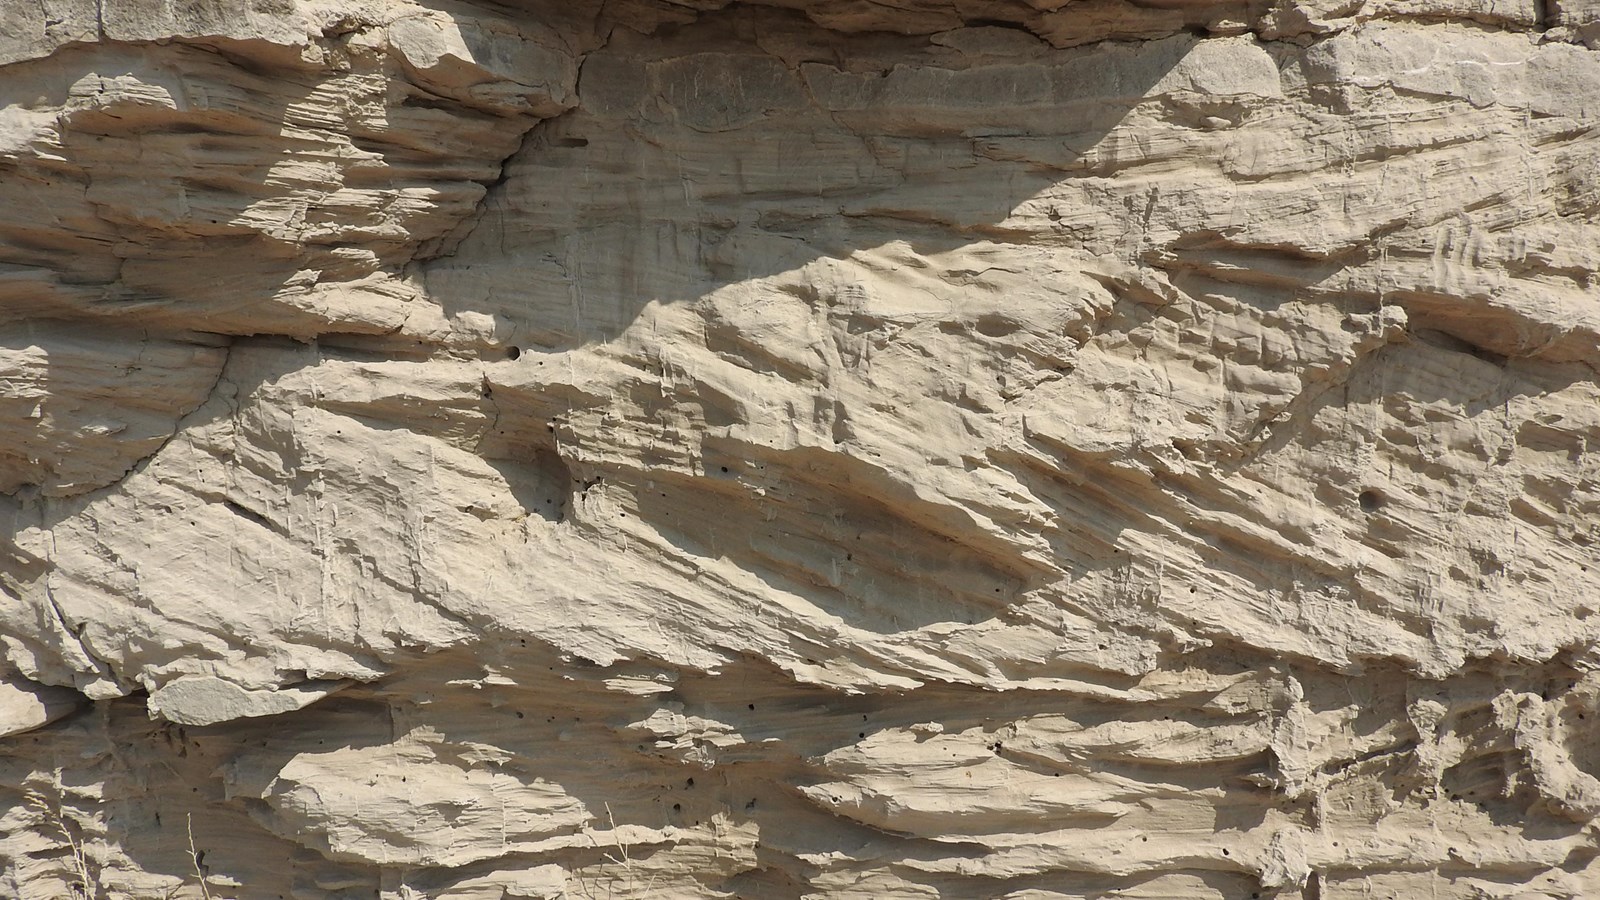 Sandstone with layers at different angles. 